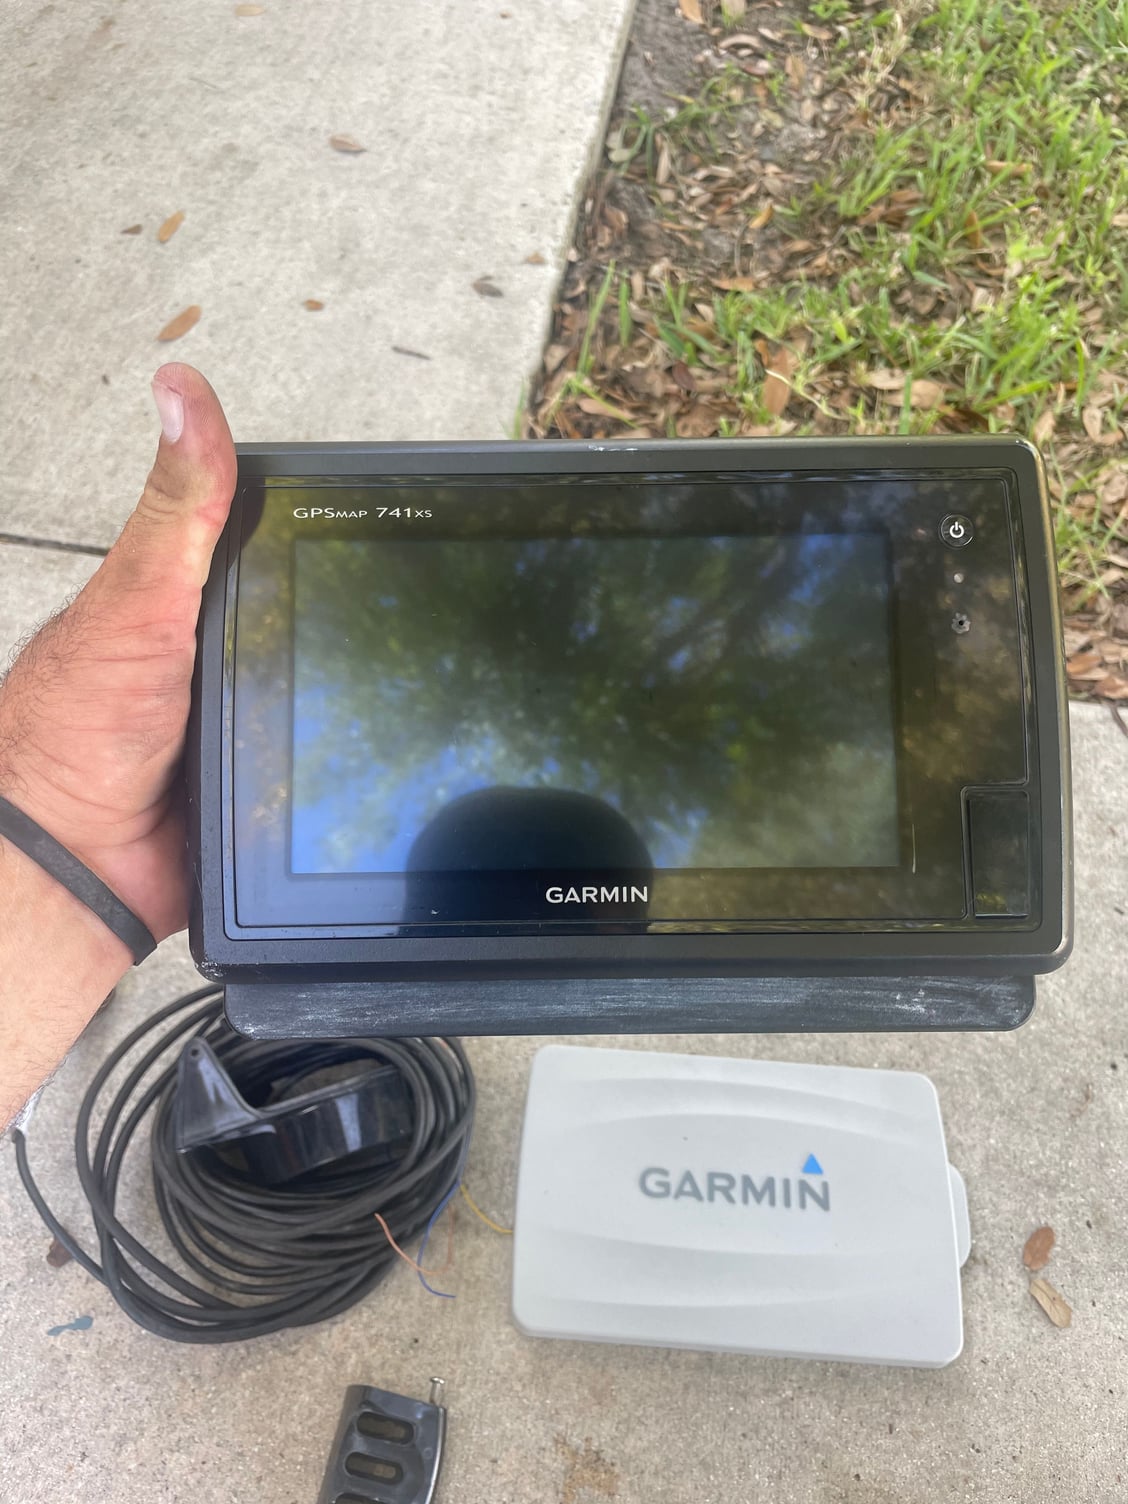 Garmin 741xs - The Hull Truth - Boating and Fishing Forum